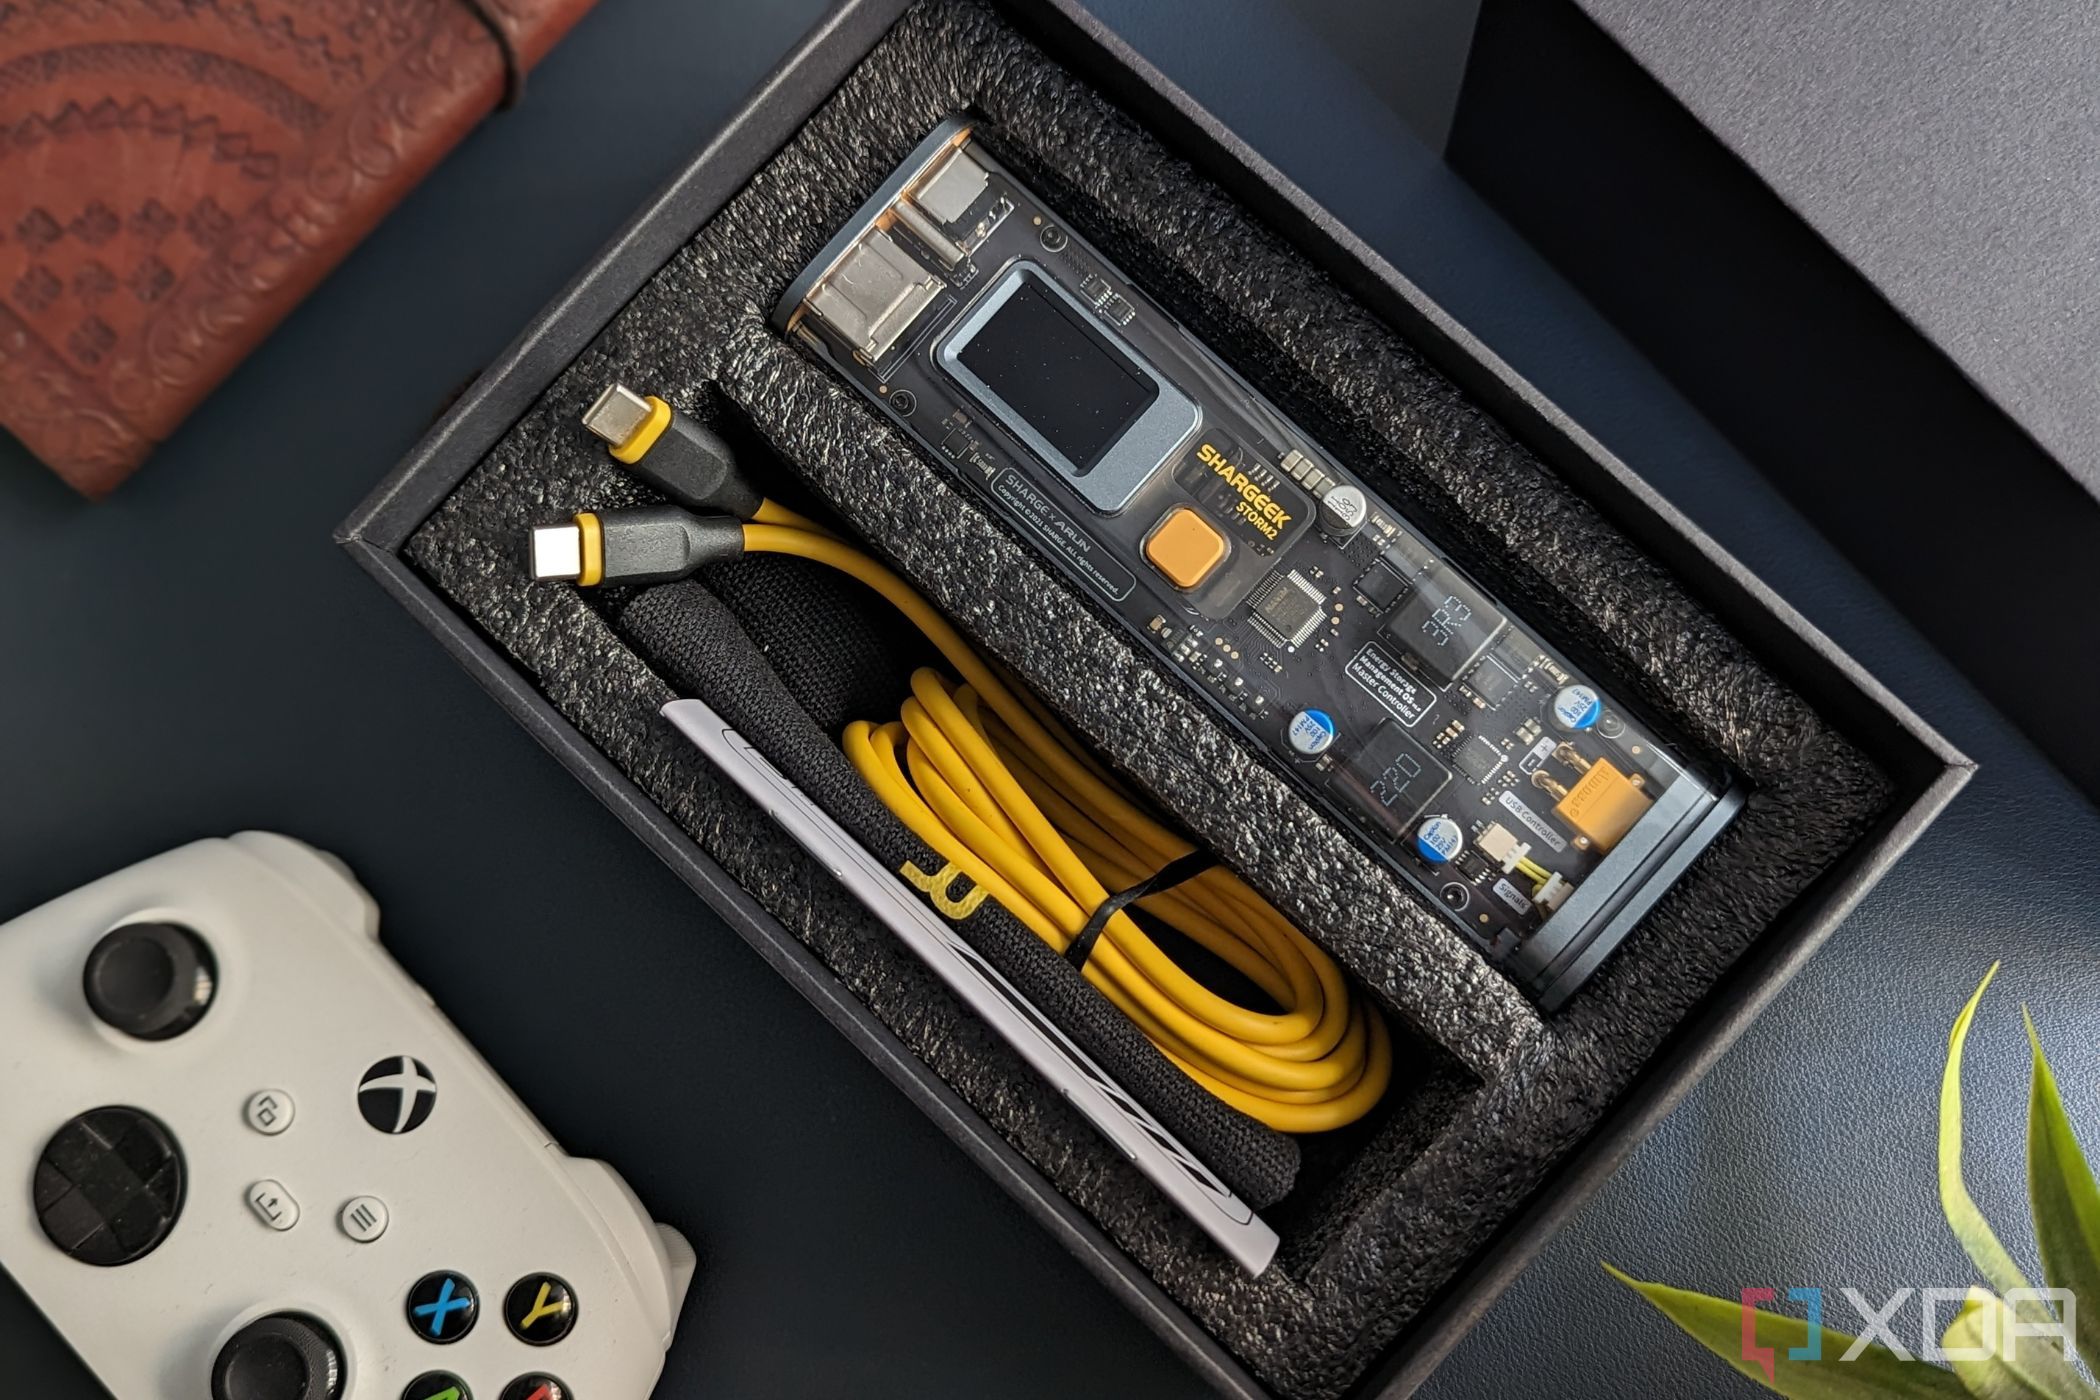 An image of the Chargeek Storm 2 battery pack in the box with its accessories that's kept on a leather desk mat with other miscellaneous items.